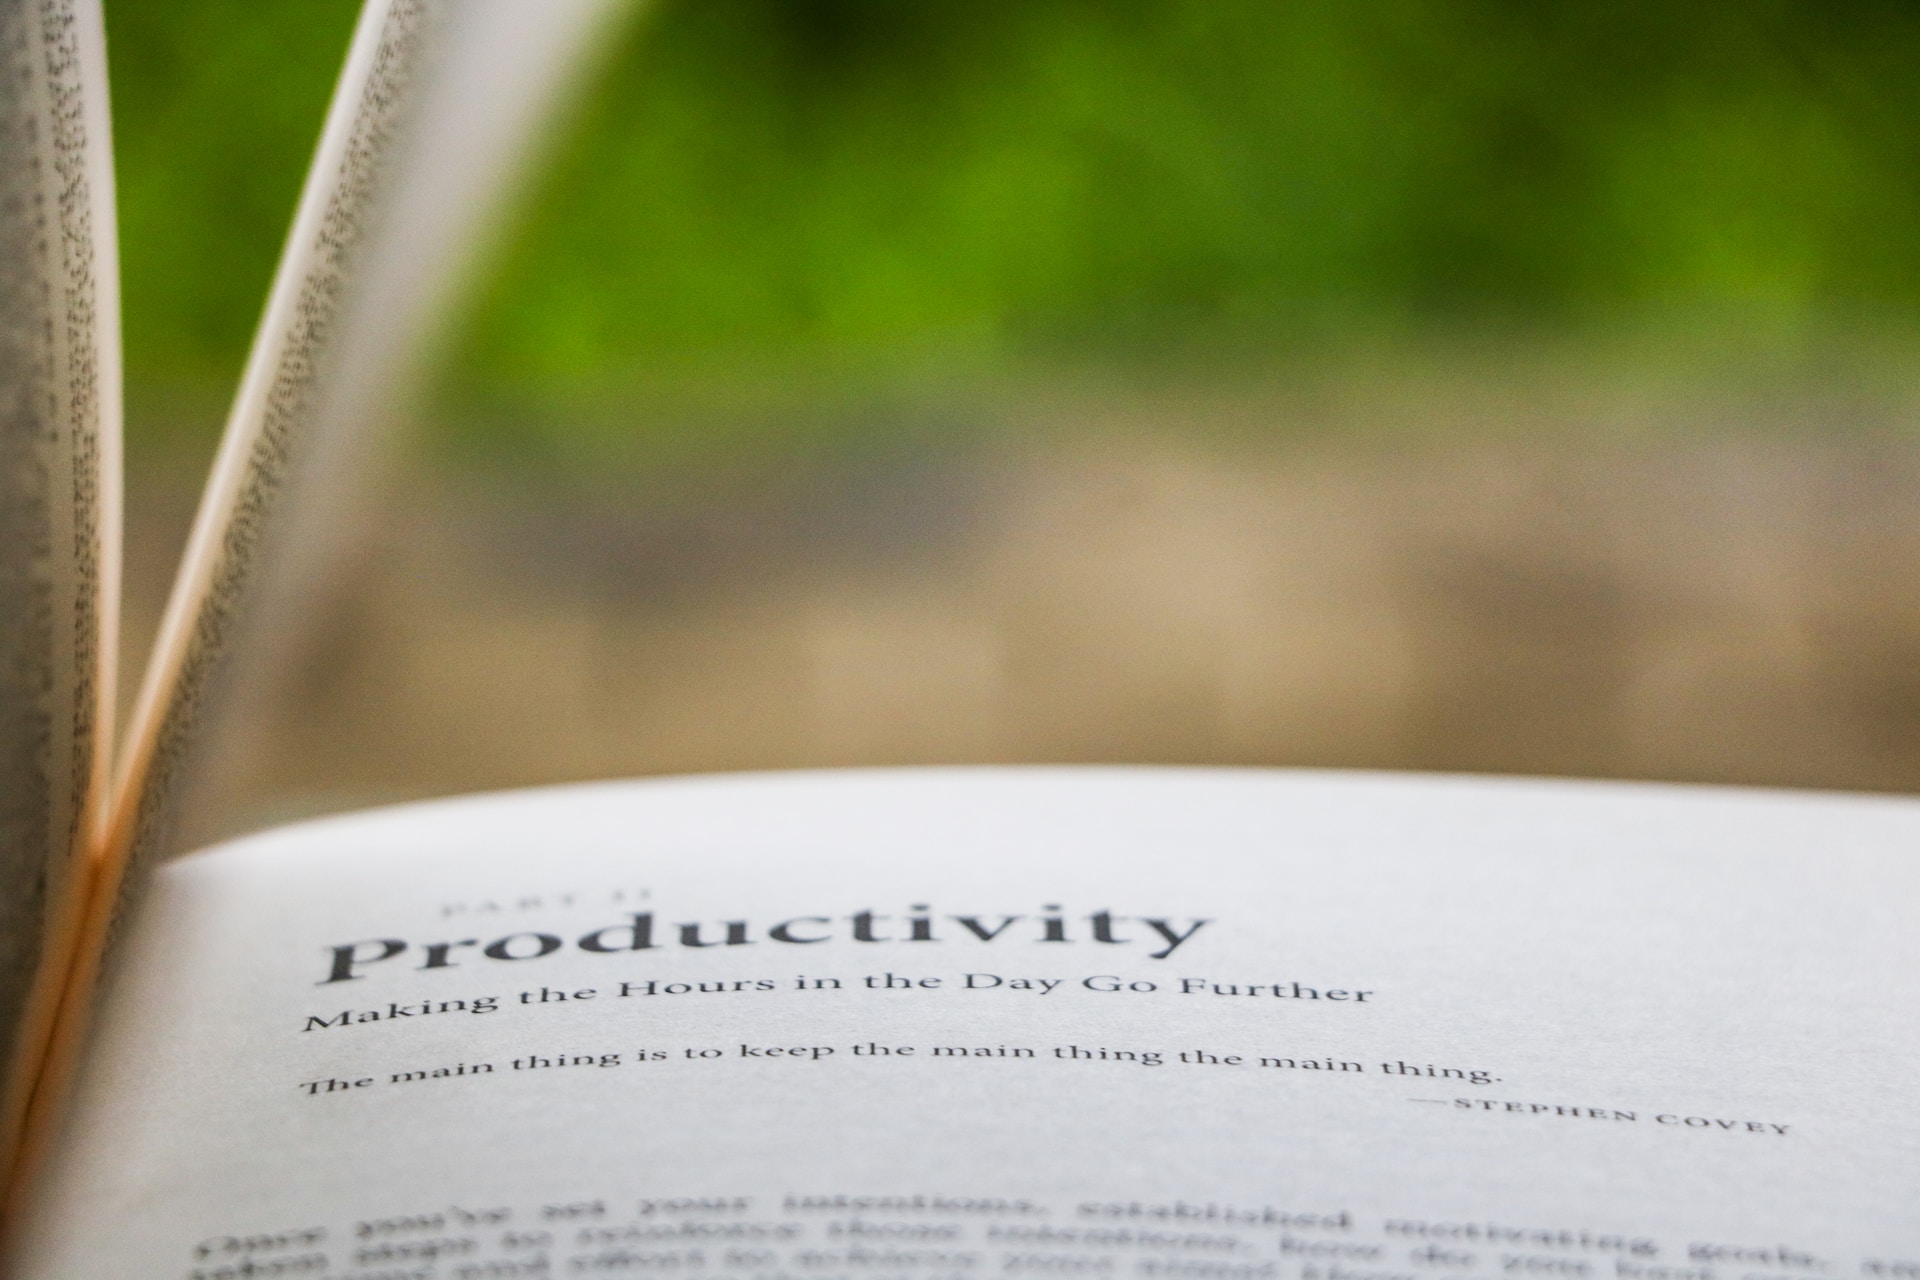 book opened on a page that display the title 'Productivity'